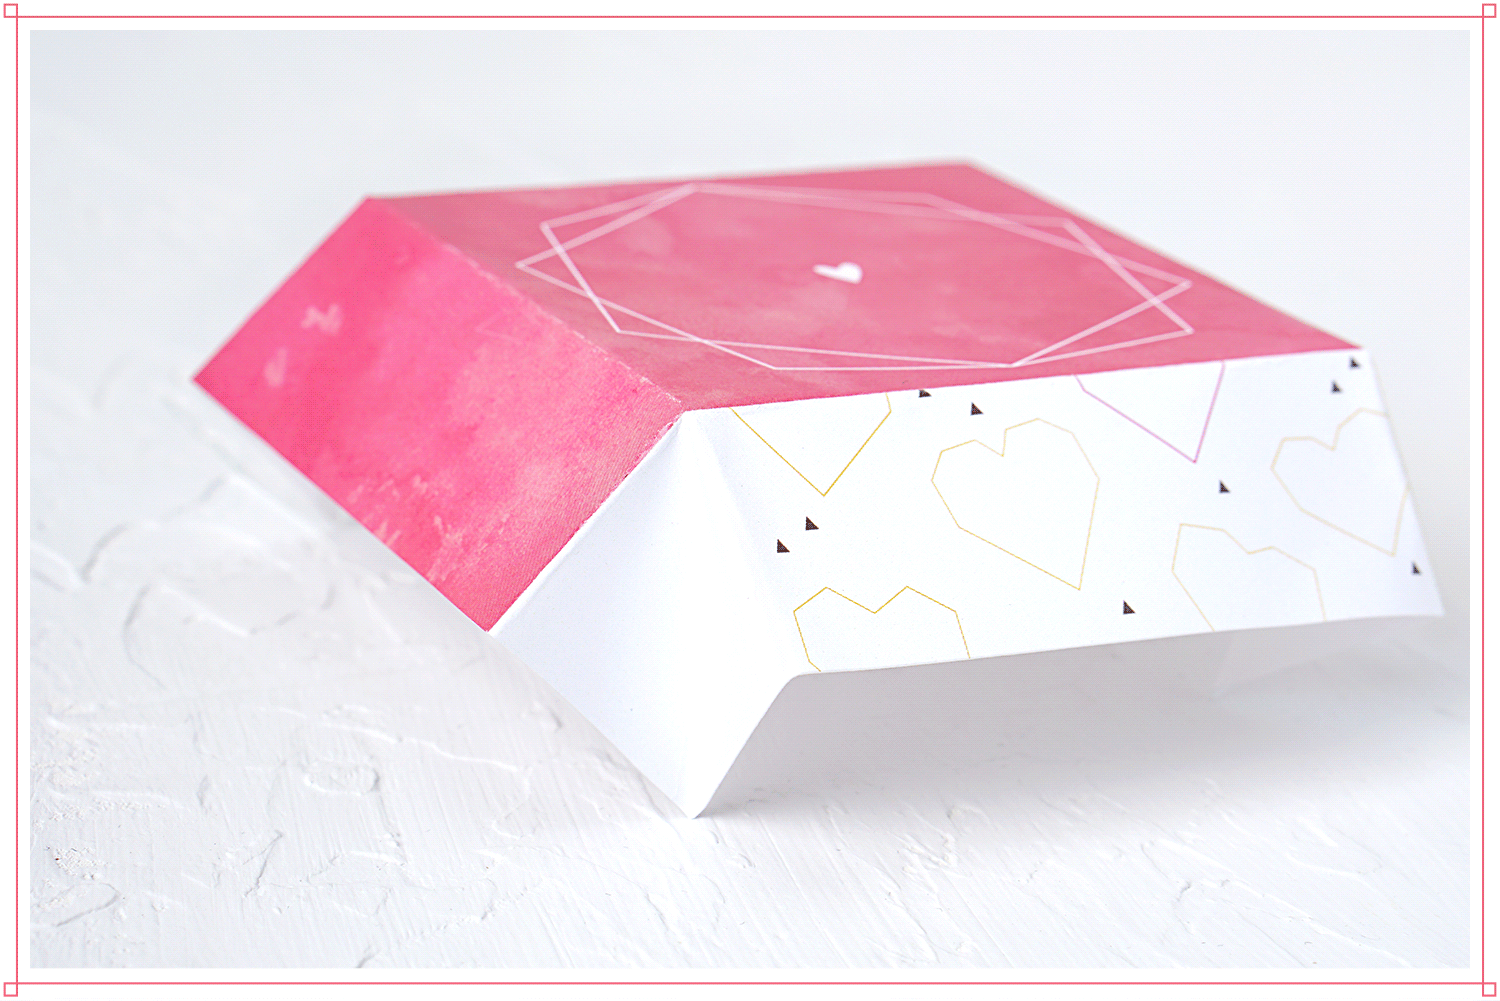 How to Make an Exploding Paper Box